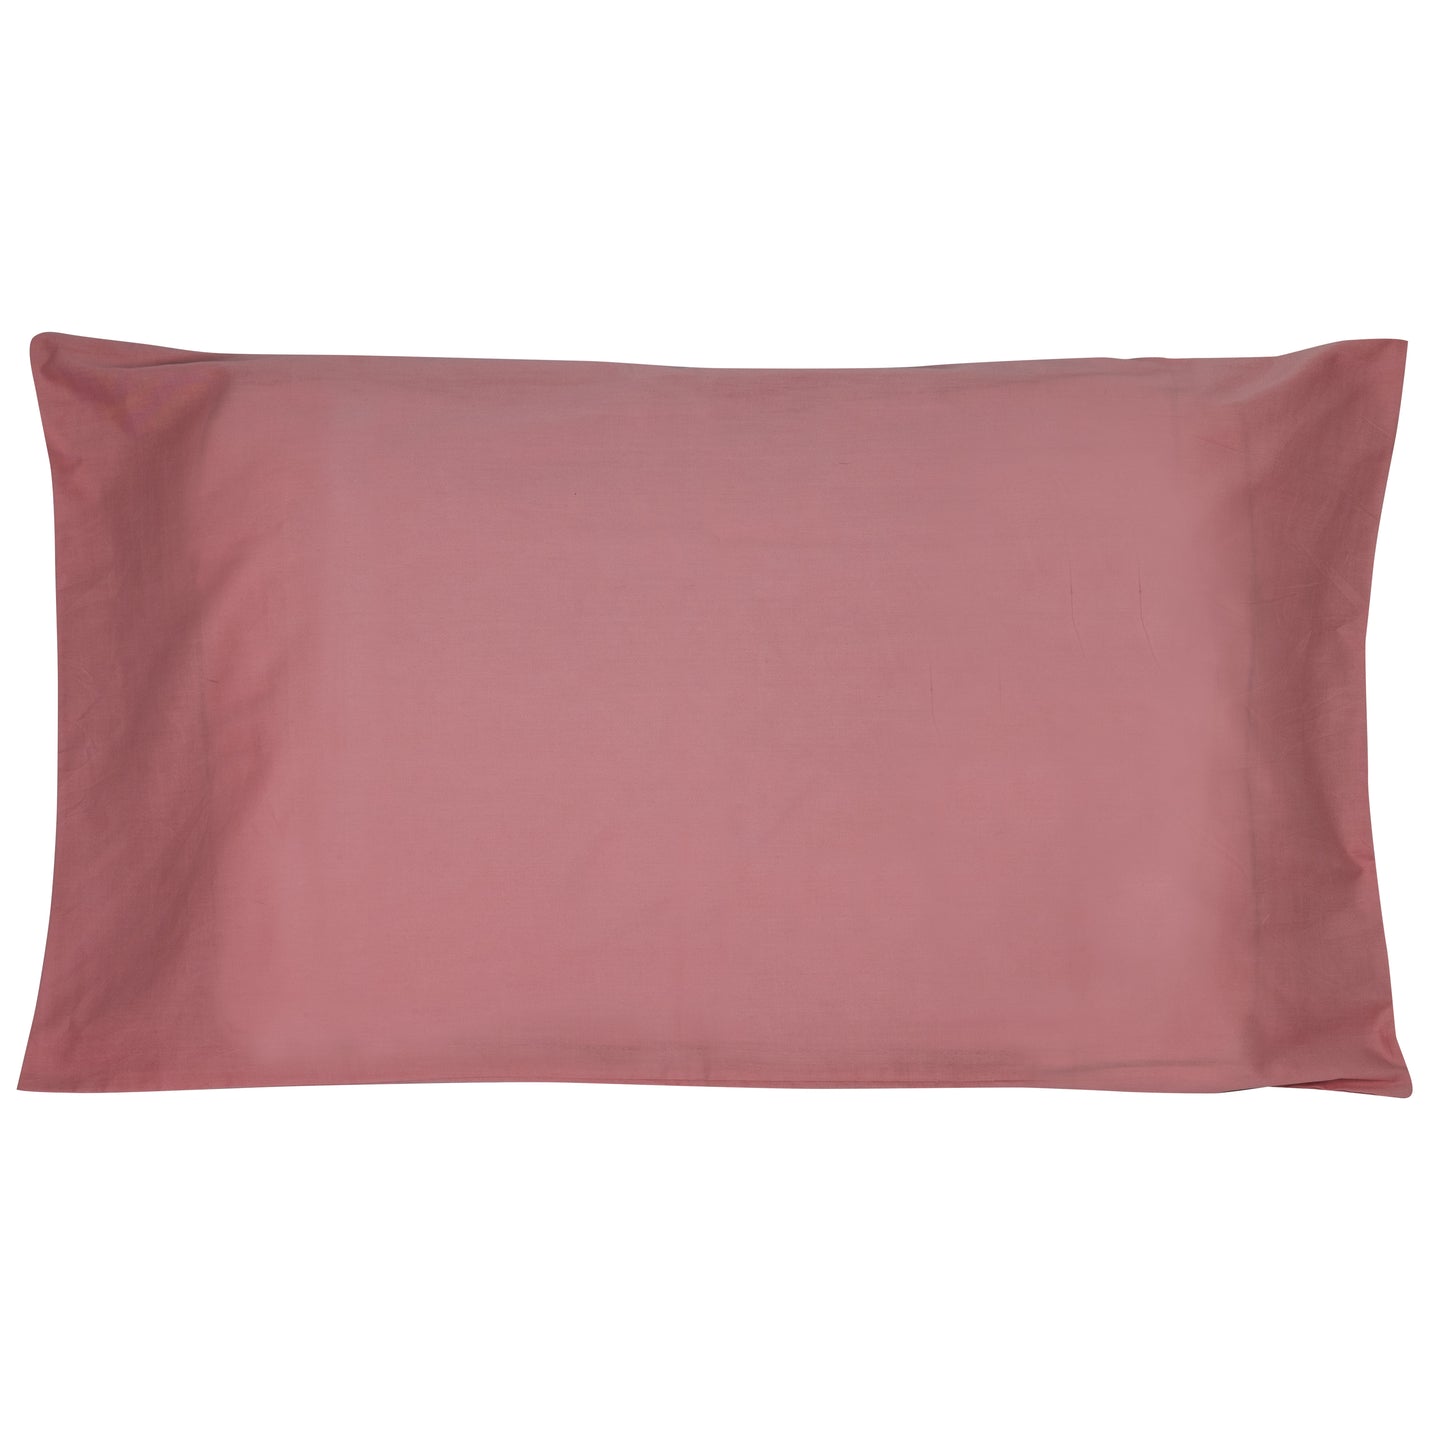 Sheets, 180 Thread Count, Rose